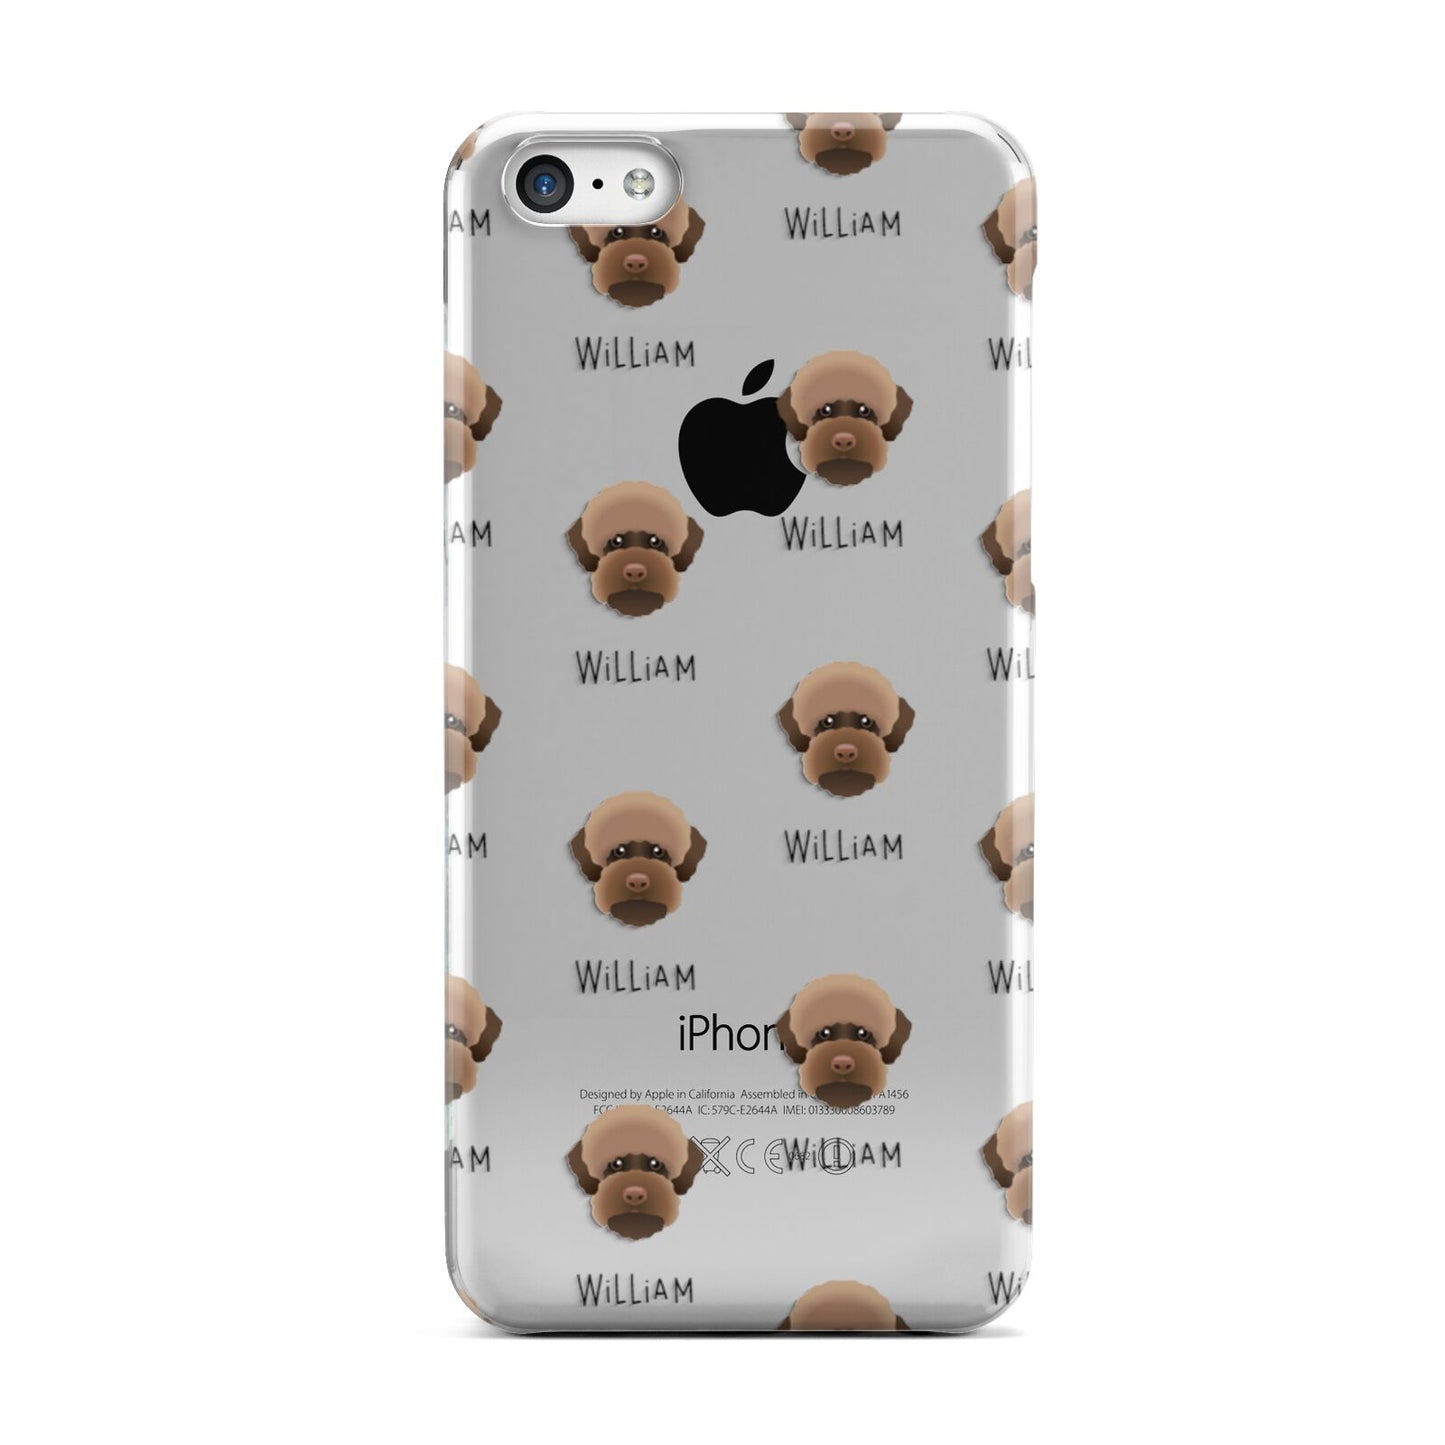 Lagotto Romagnolo Icon with Name Apple iPhone 5c Case